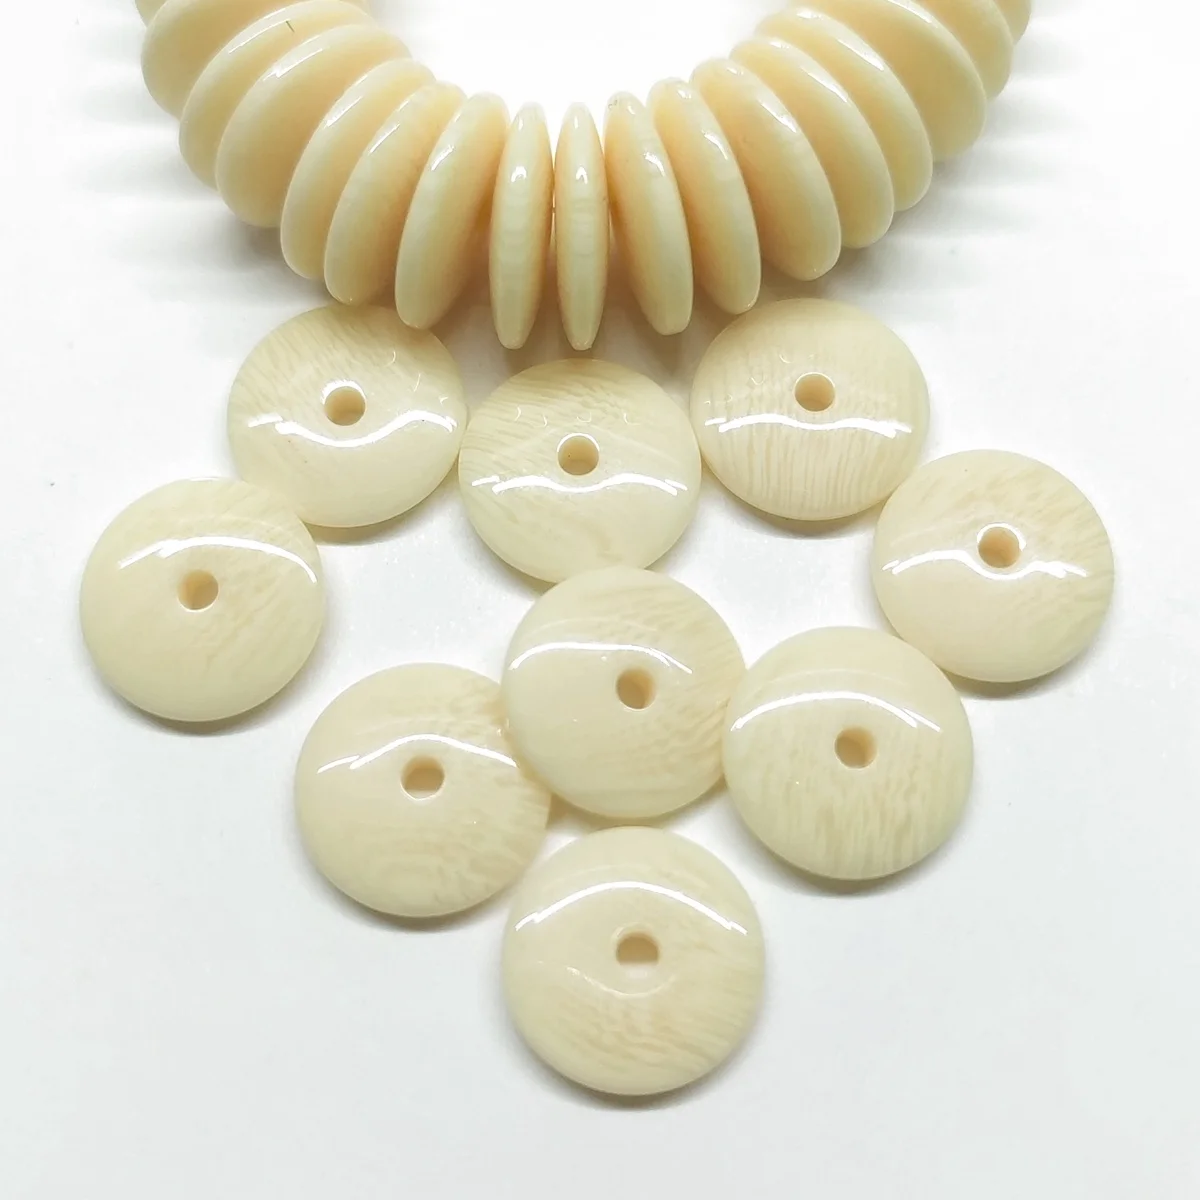 100pcs Beige Flat Round Resin Resin Imitation Ivory 6mm 8mm 10mm 12mm Loose Spacer Beads Wholesale lot for Jewelry Making